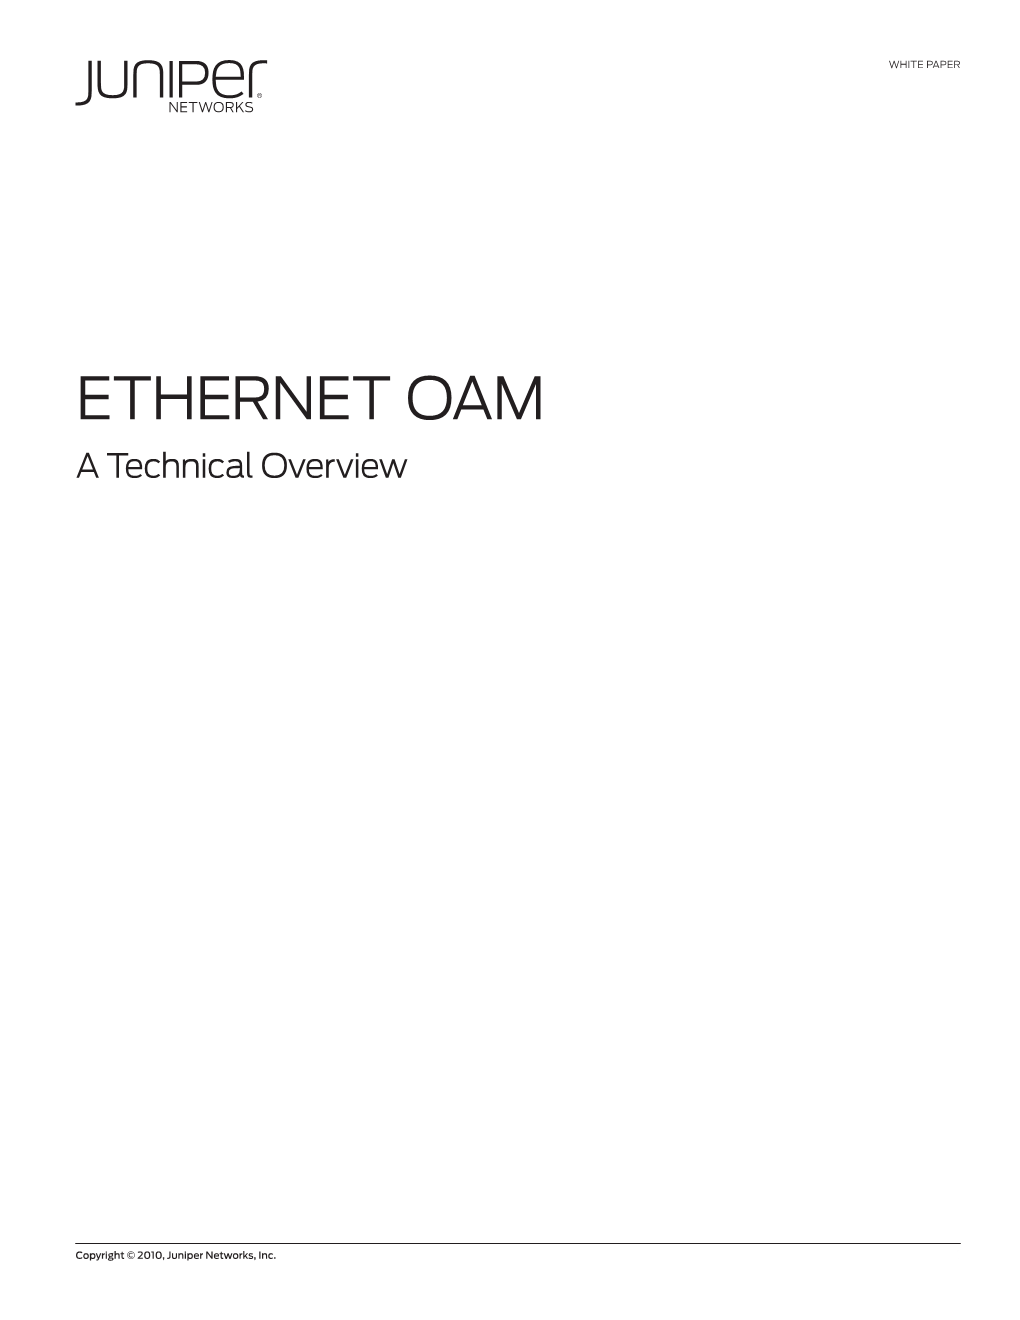 Ethernet OAM a Technical Overview